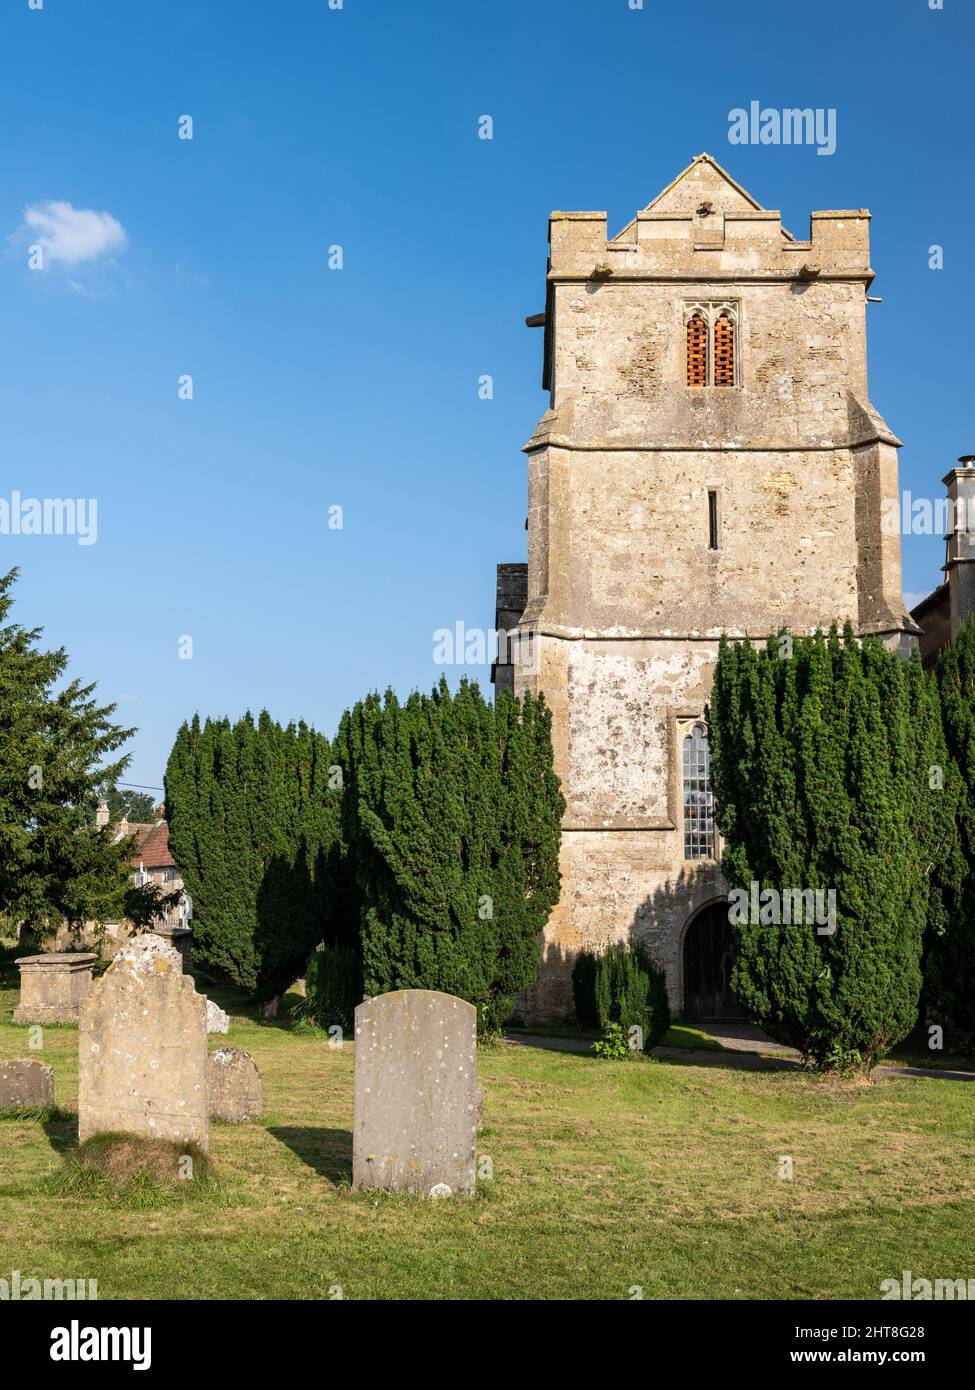 Sun shines on the traditional parish church of St Michael and All Angels in Atworth, Wiltshire. Stock Photo